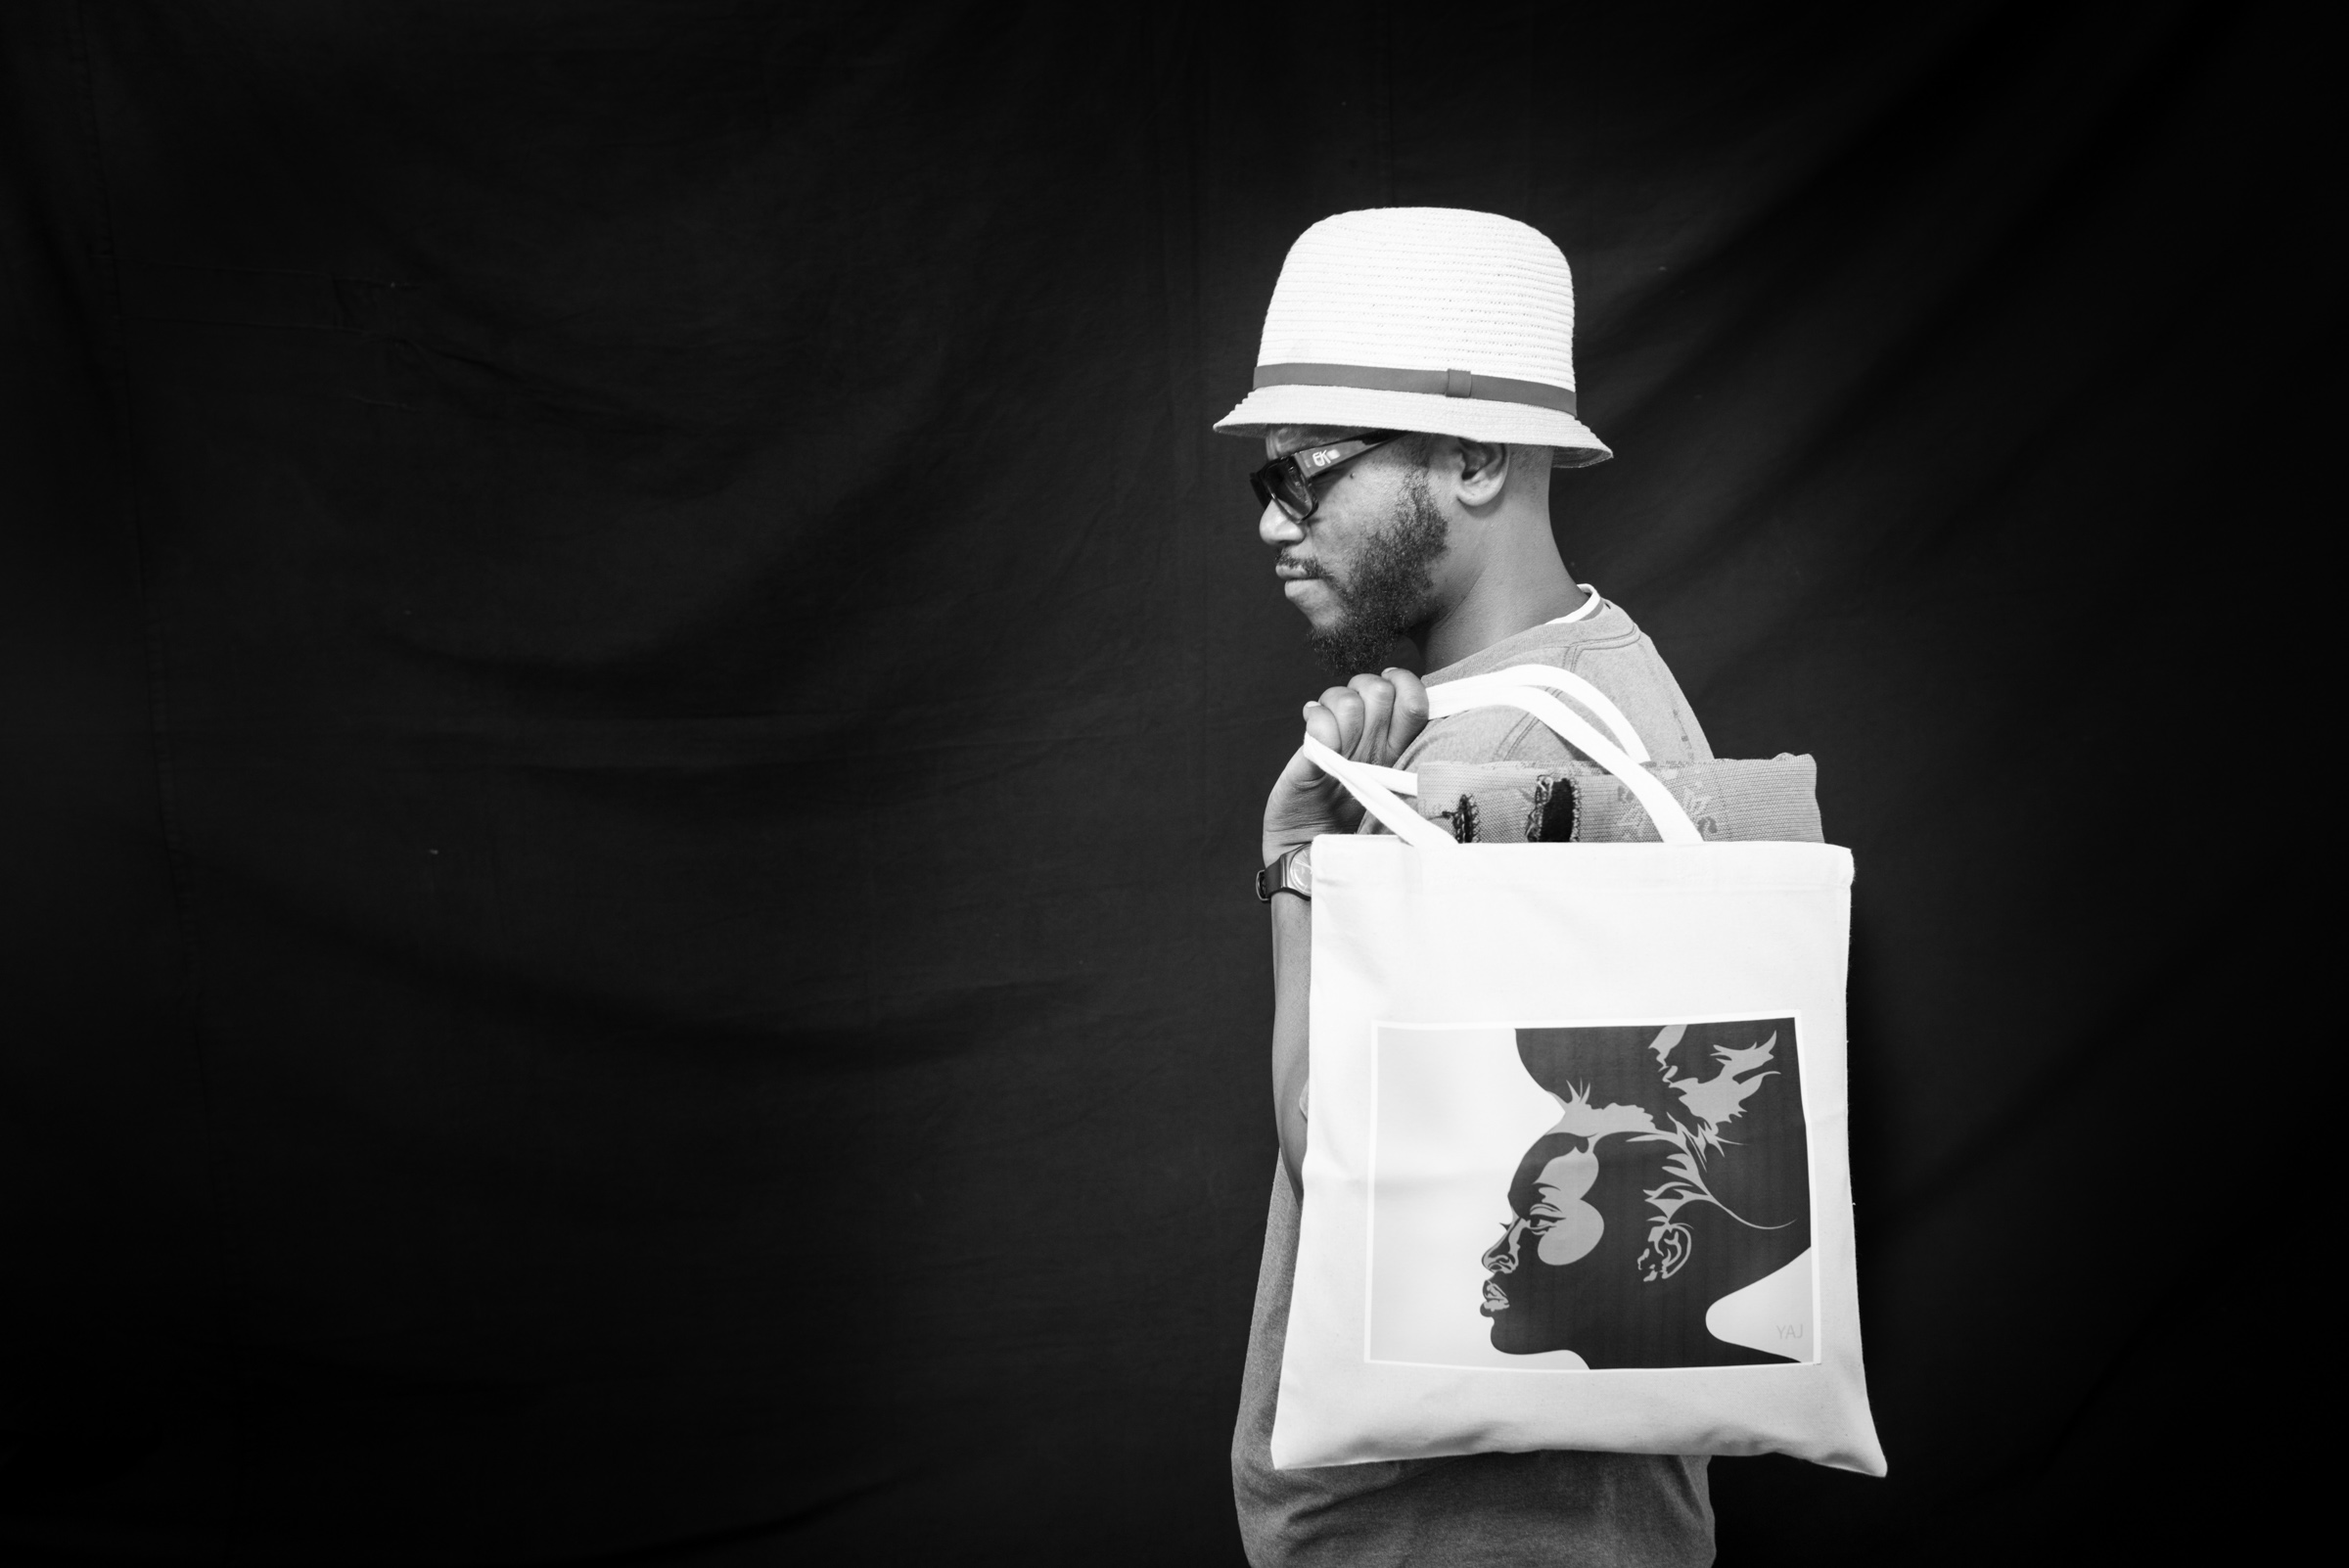 Man with Canvas Bag photographed on black background